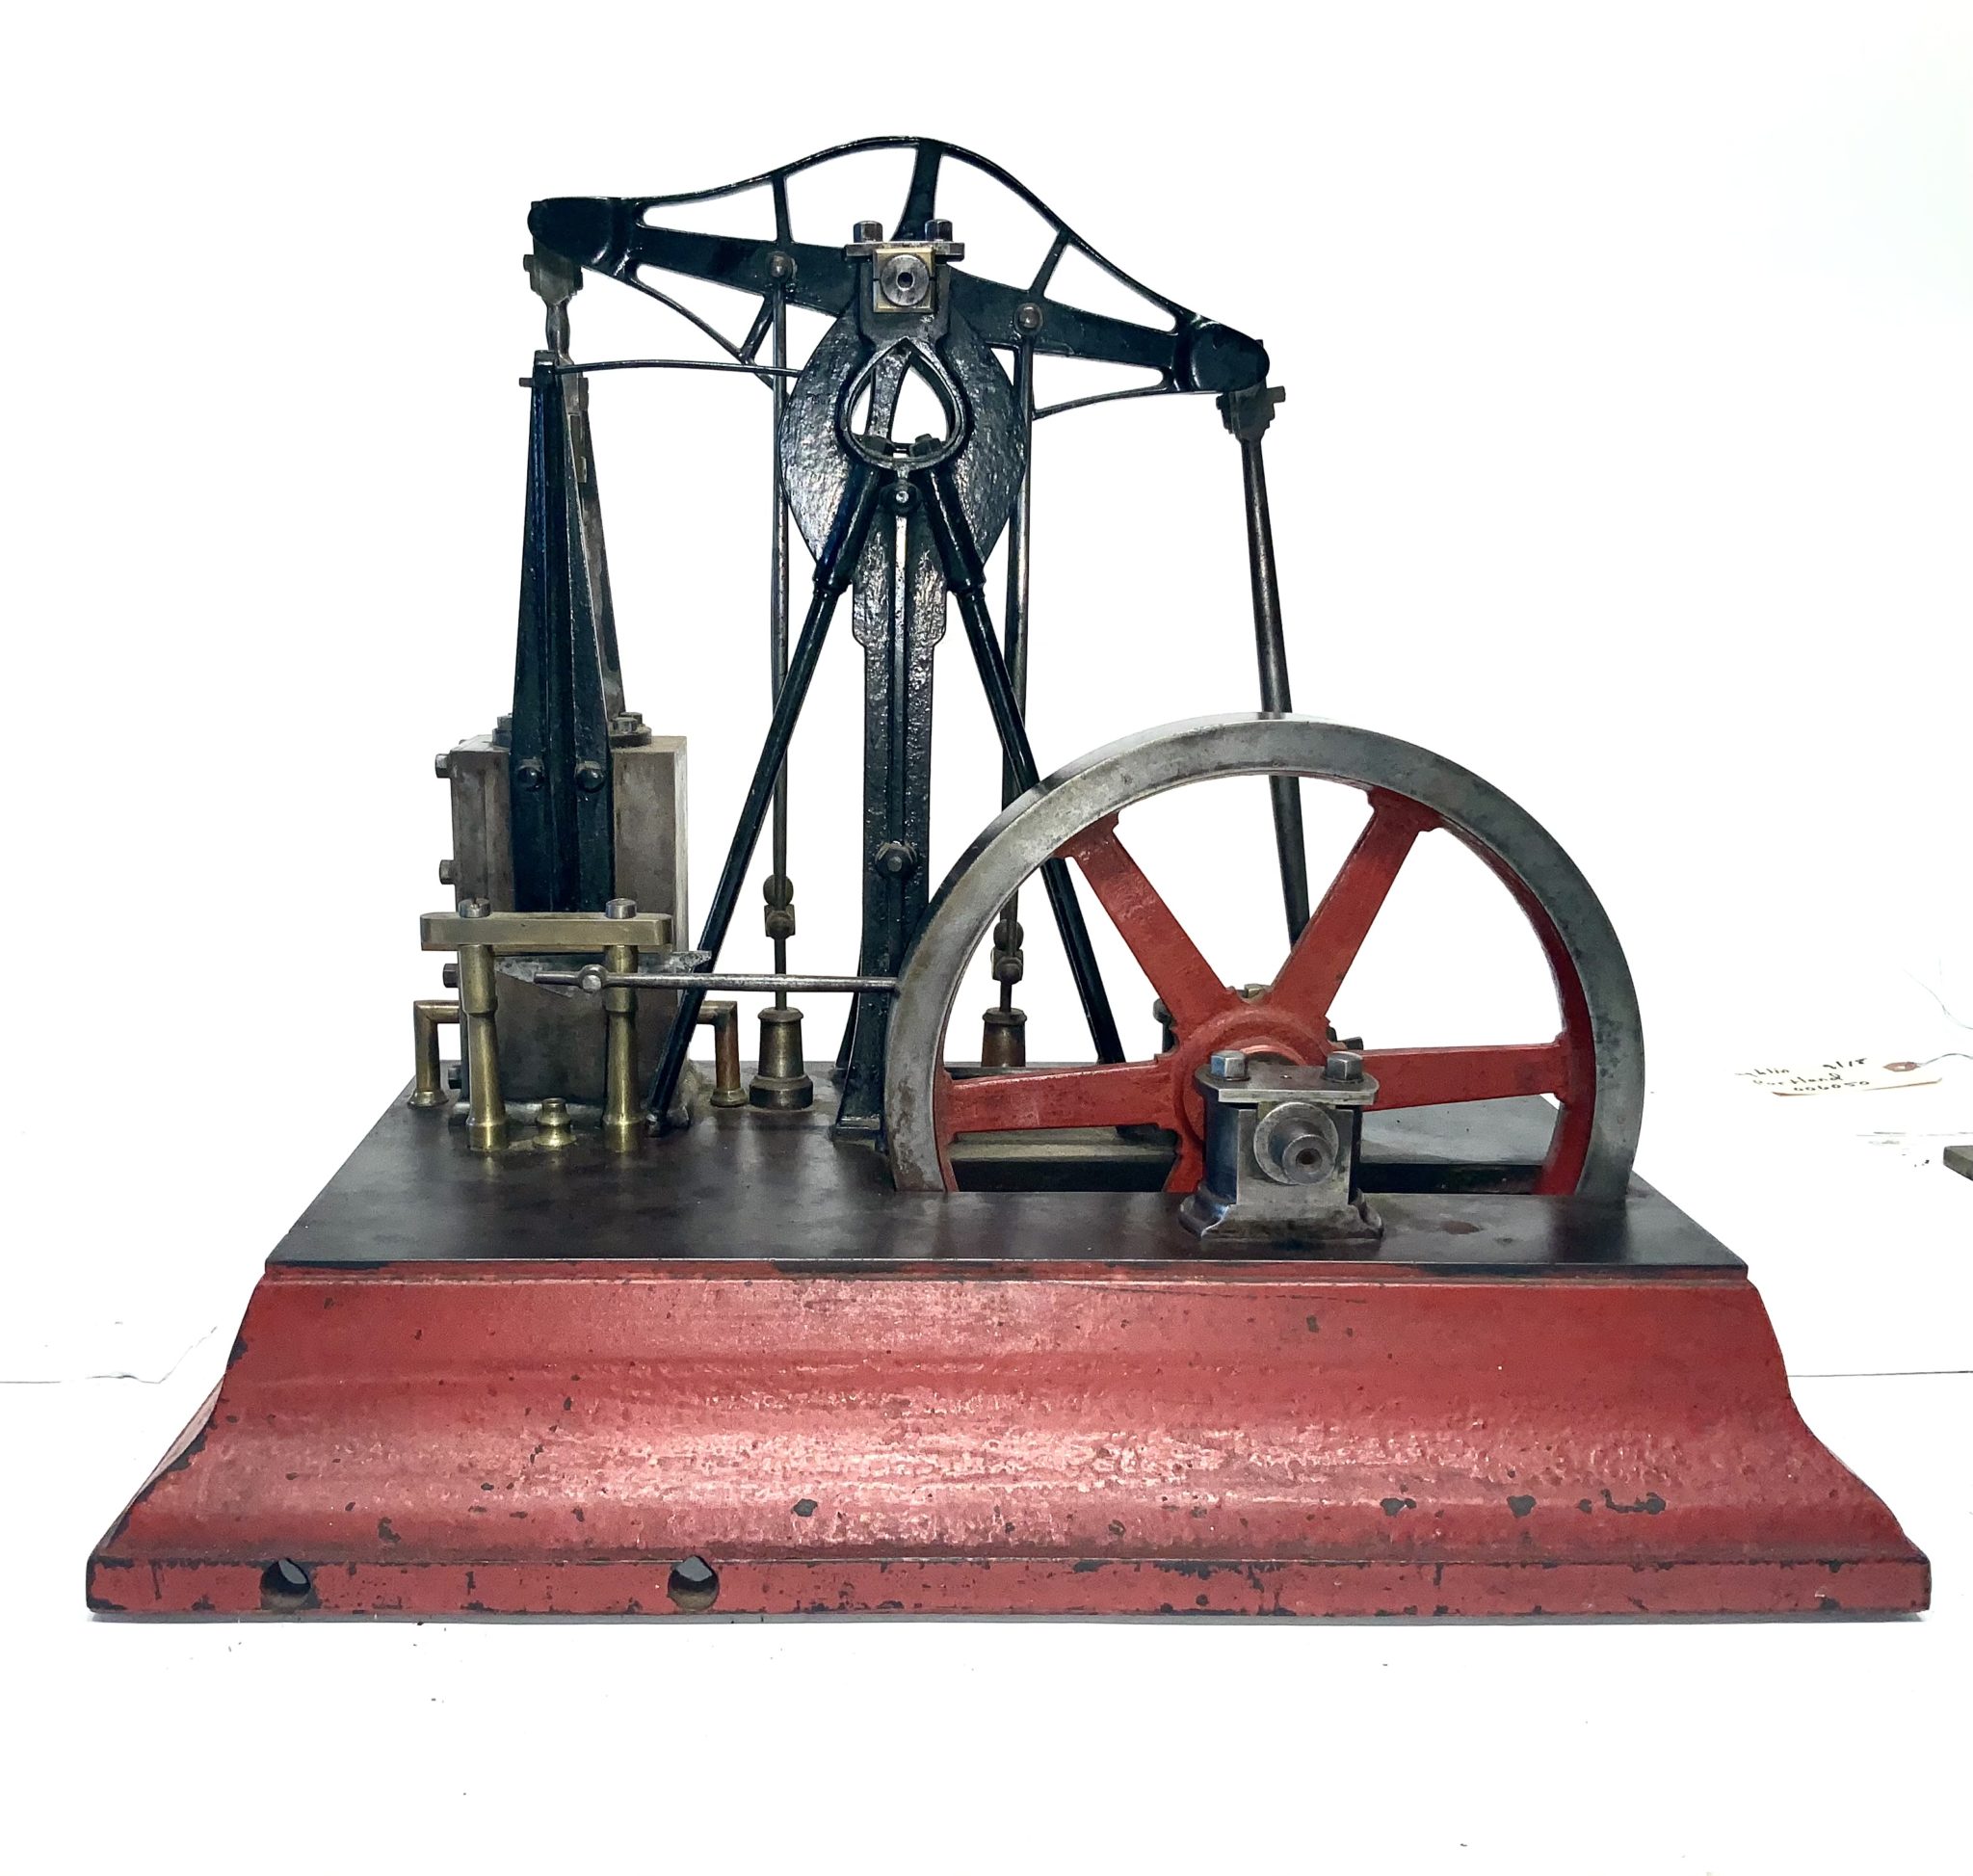 CA 1880 MODEL OF CA 1849-1853 VERY EARLY CORLISS WALKING BEAM STEAM ENGINE WITH UNUSUAL VALVE GEAR